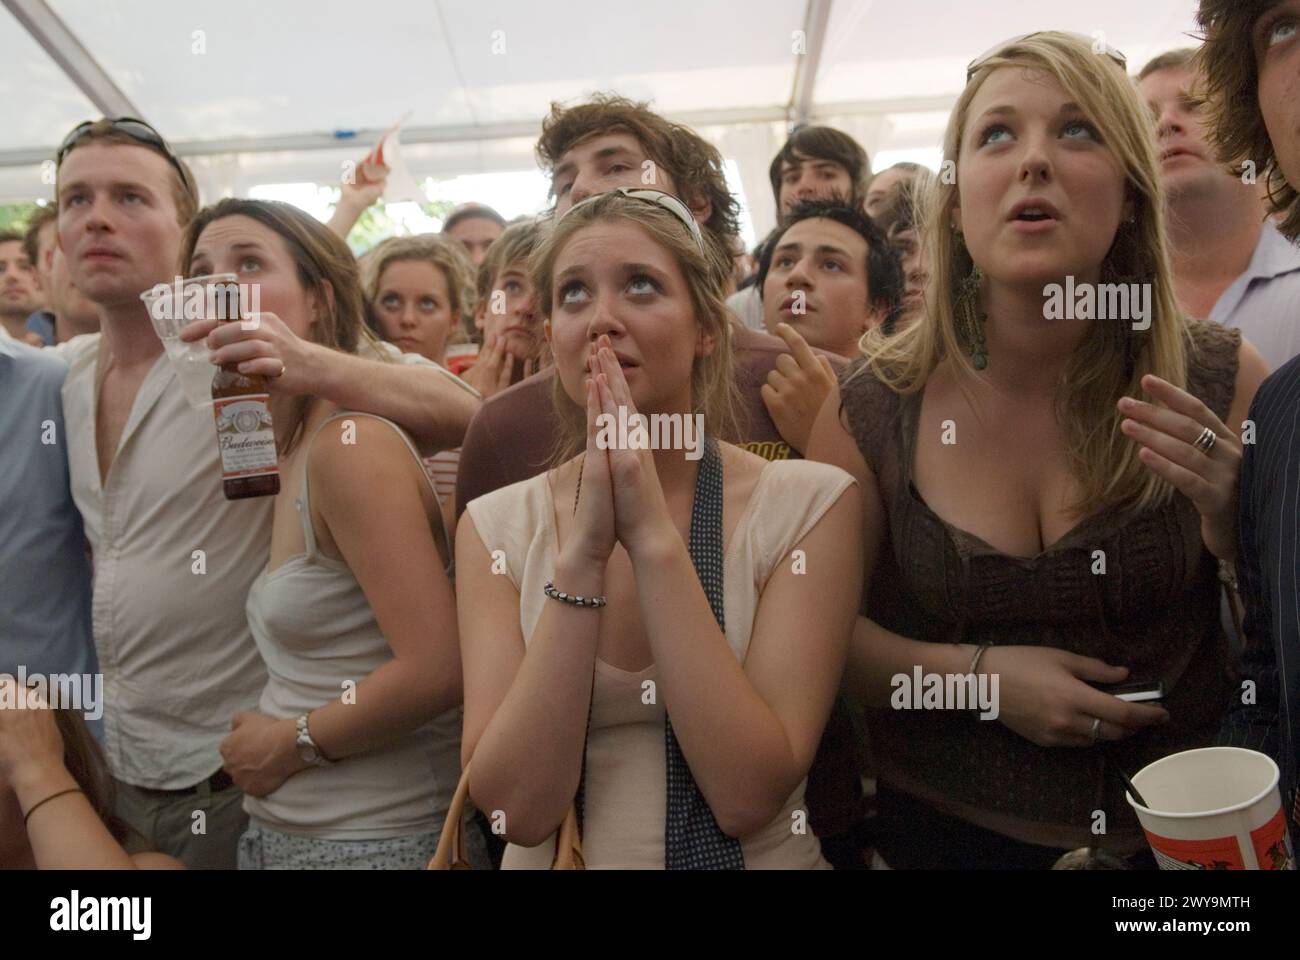 Penalty Shoot Out World Cup Football 2006. England v Portugal. England went on to lose. Fans photographed in beer tent marquee watching the football game on specially erected televisions sets. Oxfordshire UK 2000s HOMER SYKES. Stock Photo